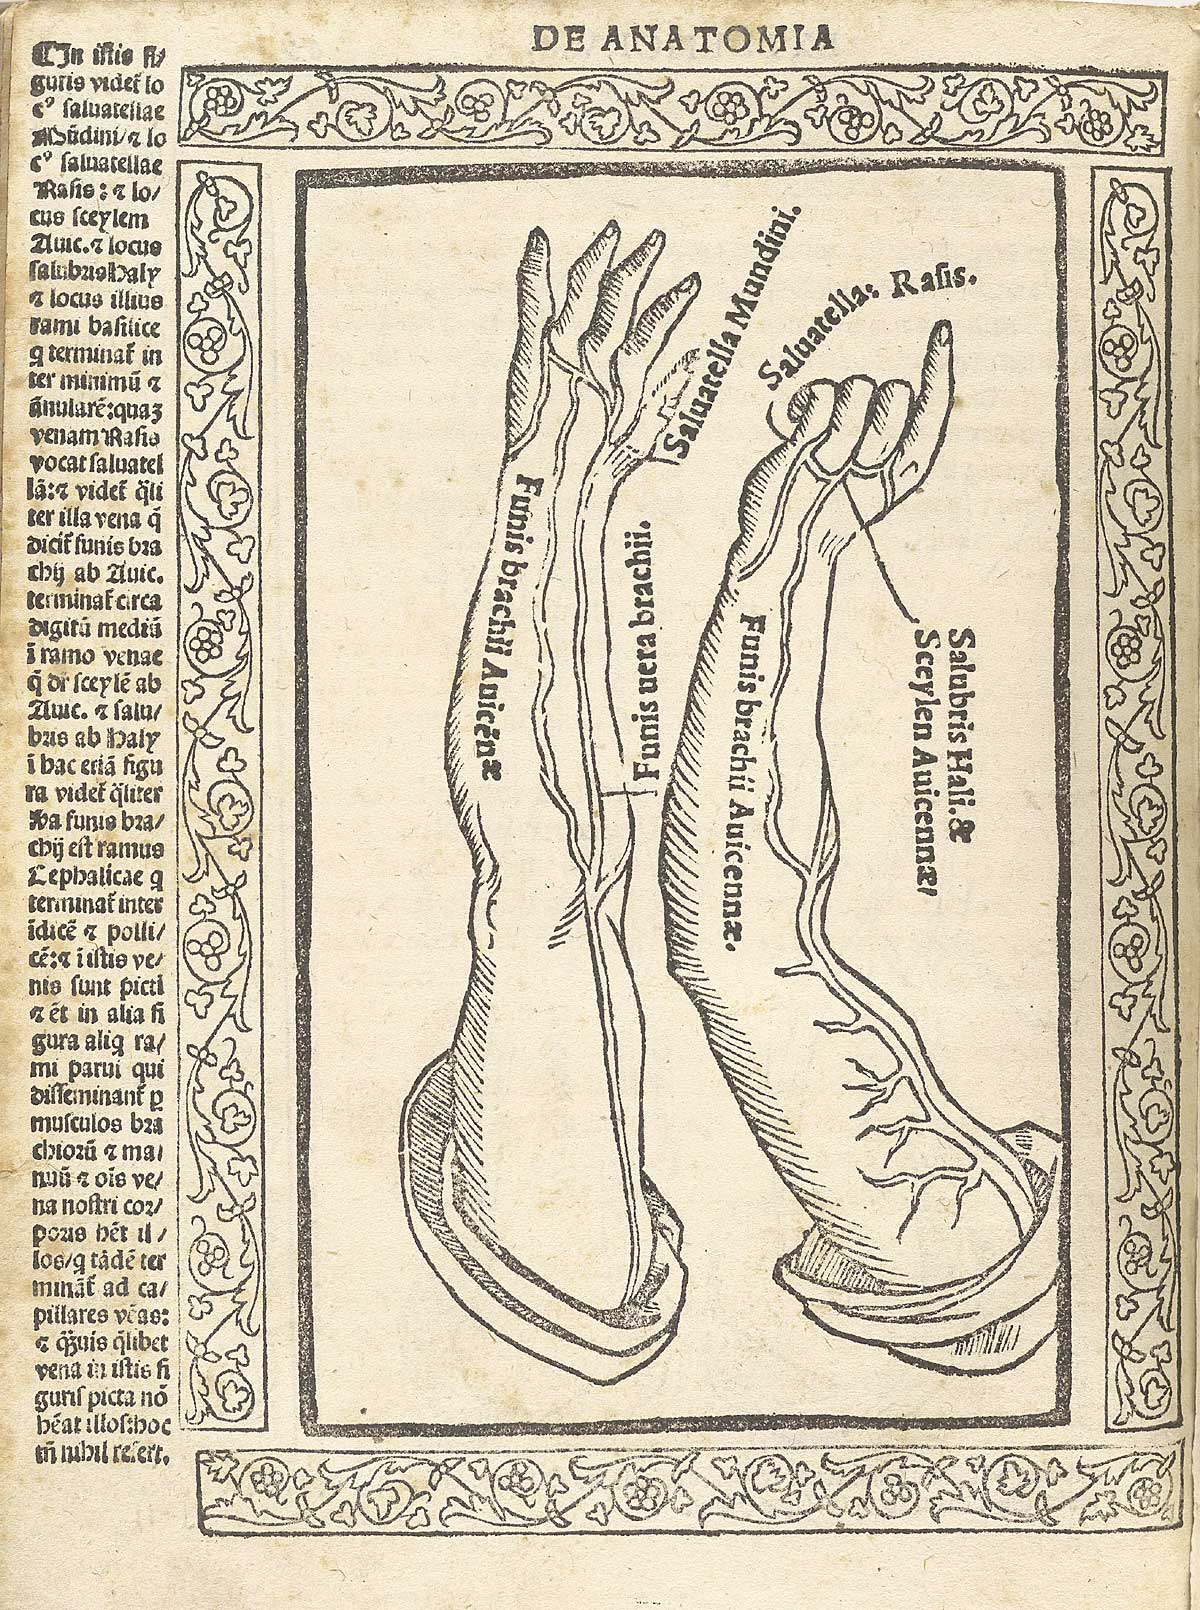 Two woodcut figures of the arms, side by side with hand pointed upwards, with special emphasis on the arteries and veins named in Avnicenna’s Canon; with a woodcut border and text in Latin on the left side of page, from Berengario da Carpi’s Isagogae breues, Bologna, 1523, NLM Call no. WZ 240 B488i 1523.